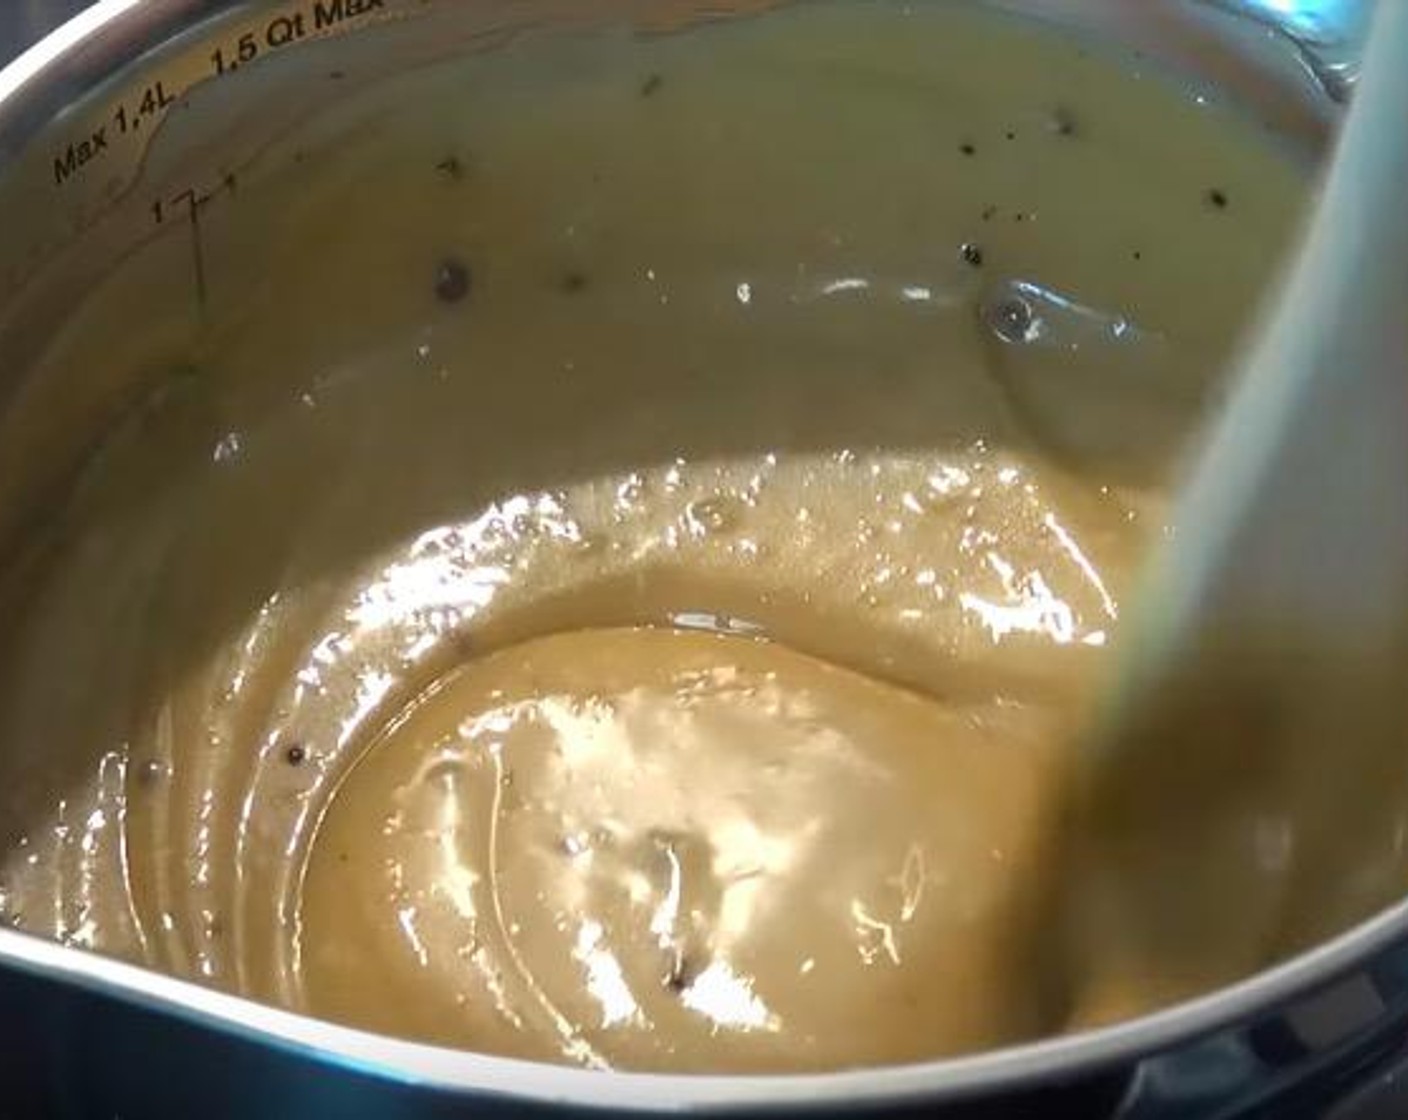 step 1 In a small saucepan, add Butter (1/2 cup), Sweetened Condensed Milk (3/4 cup), Golden Syrup (2 Tbsp) and Instant Coffee (1 Tbsp). Stir over low heat until smooth.